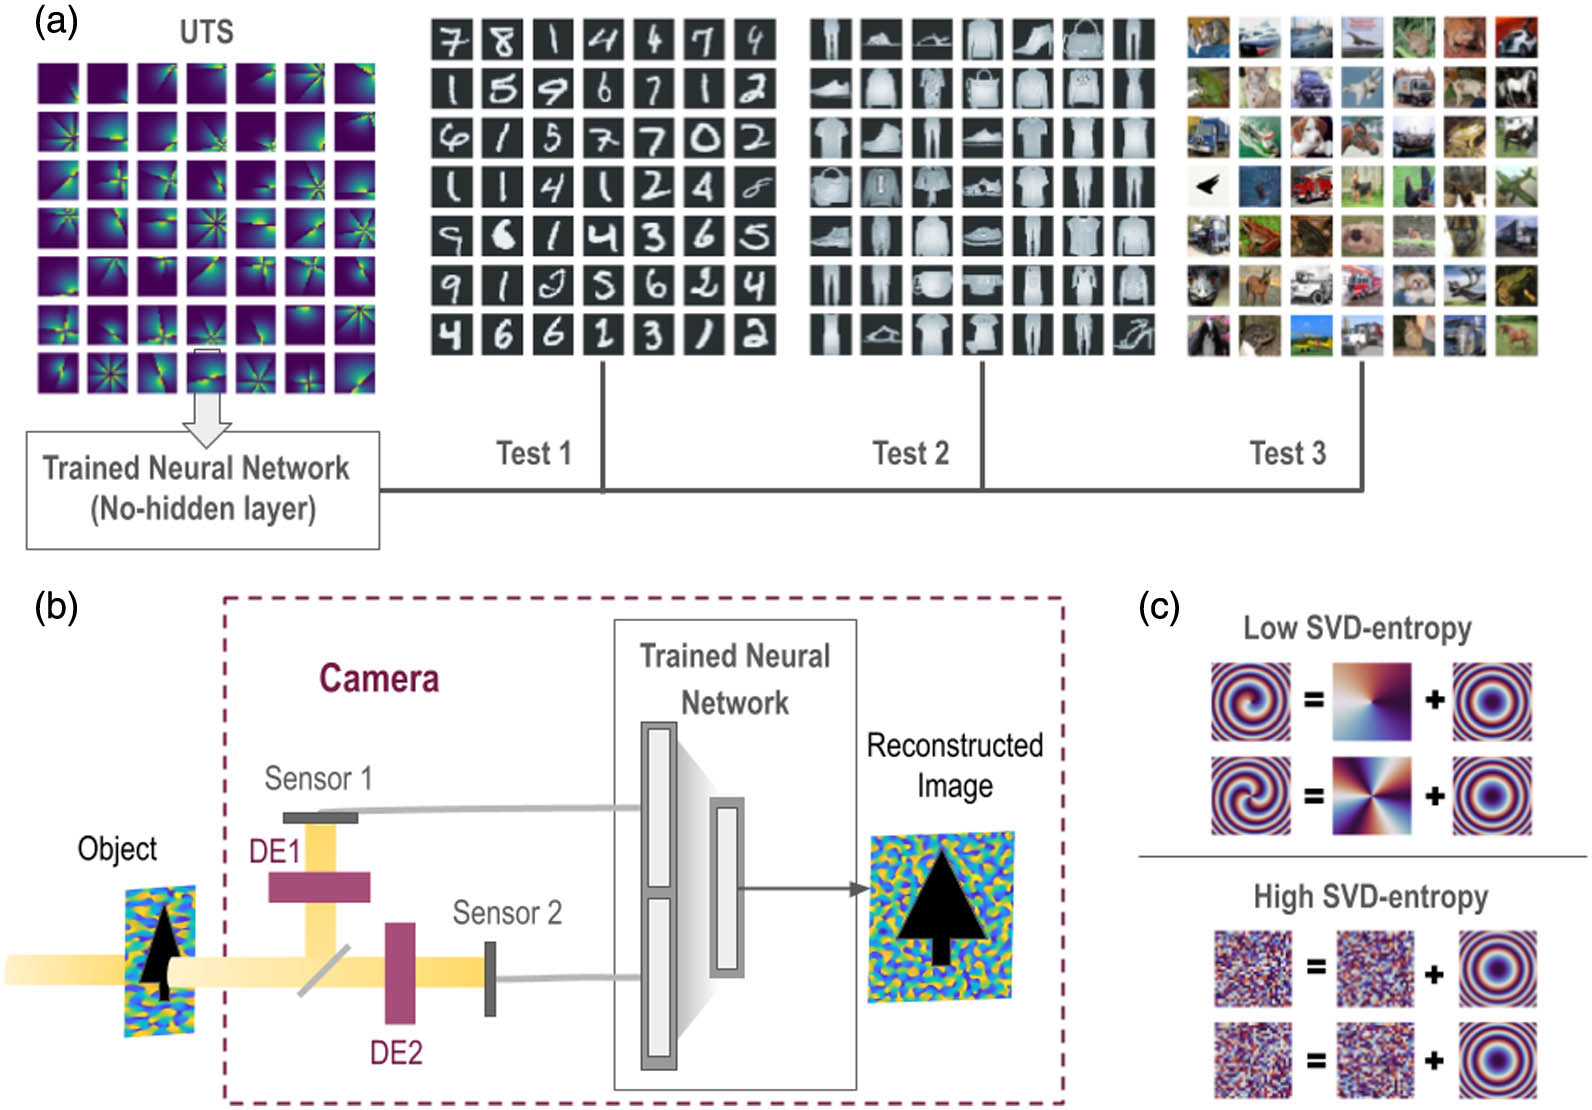 (a) Project objective: design a generalized training set for a neural network, which can later be used for general image reconstruction without retraining and can operate in real time. (b) Schematic of hybrid vision camera where light from an object is transmitted through a diffractive encoder (DE). Sensors capture two transmitted images that are combined as inputs to the trained neural network, which reconstruct the object from the detector-plane images. (c) This project employs two pairs of diffractive encoders: one with low SVD-entropy (lens and topological charge m=1 and 3) and the other with high SVD-entropy (uniformly distributed random pattern).